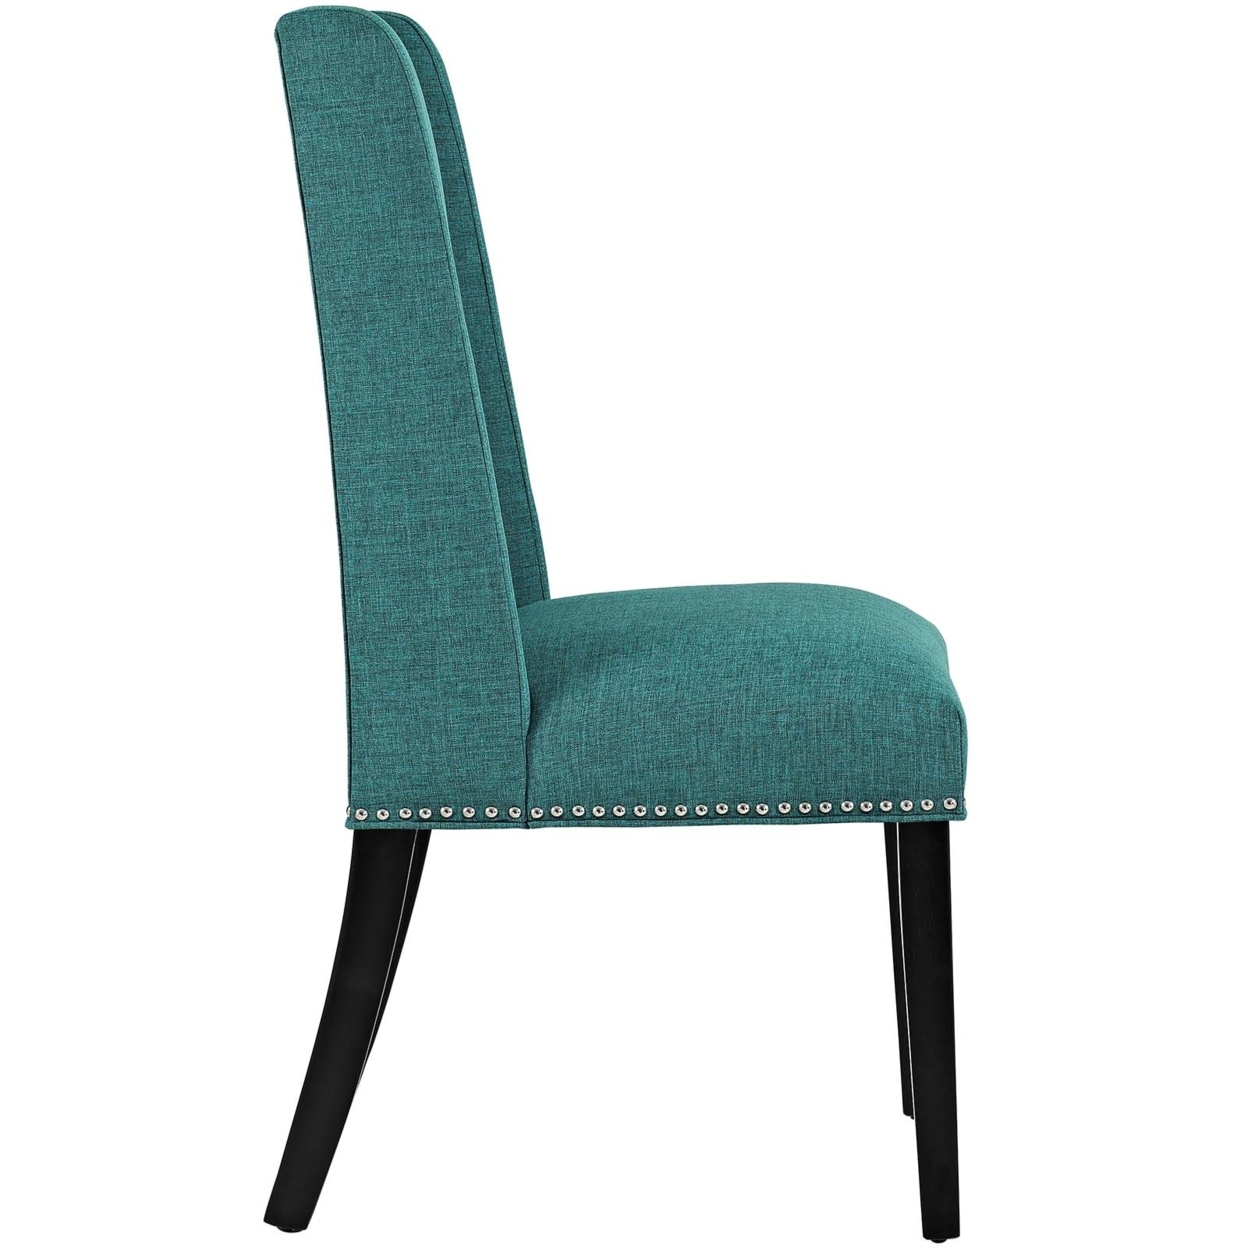 Baron Dining Chair Fabric Set Of 4, Teal